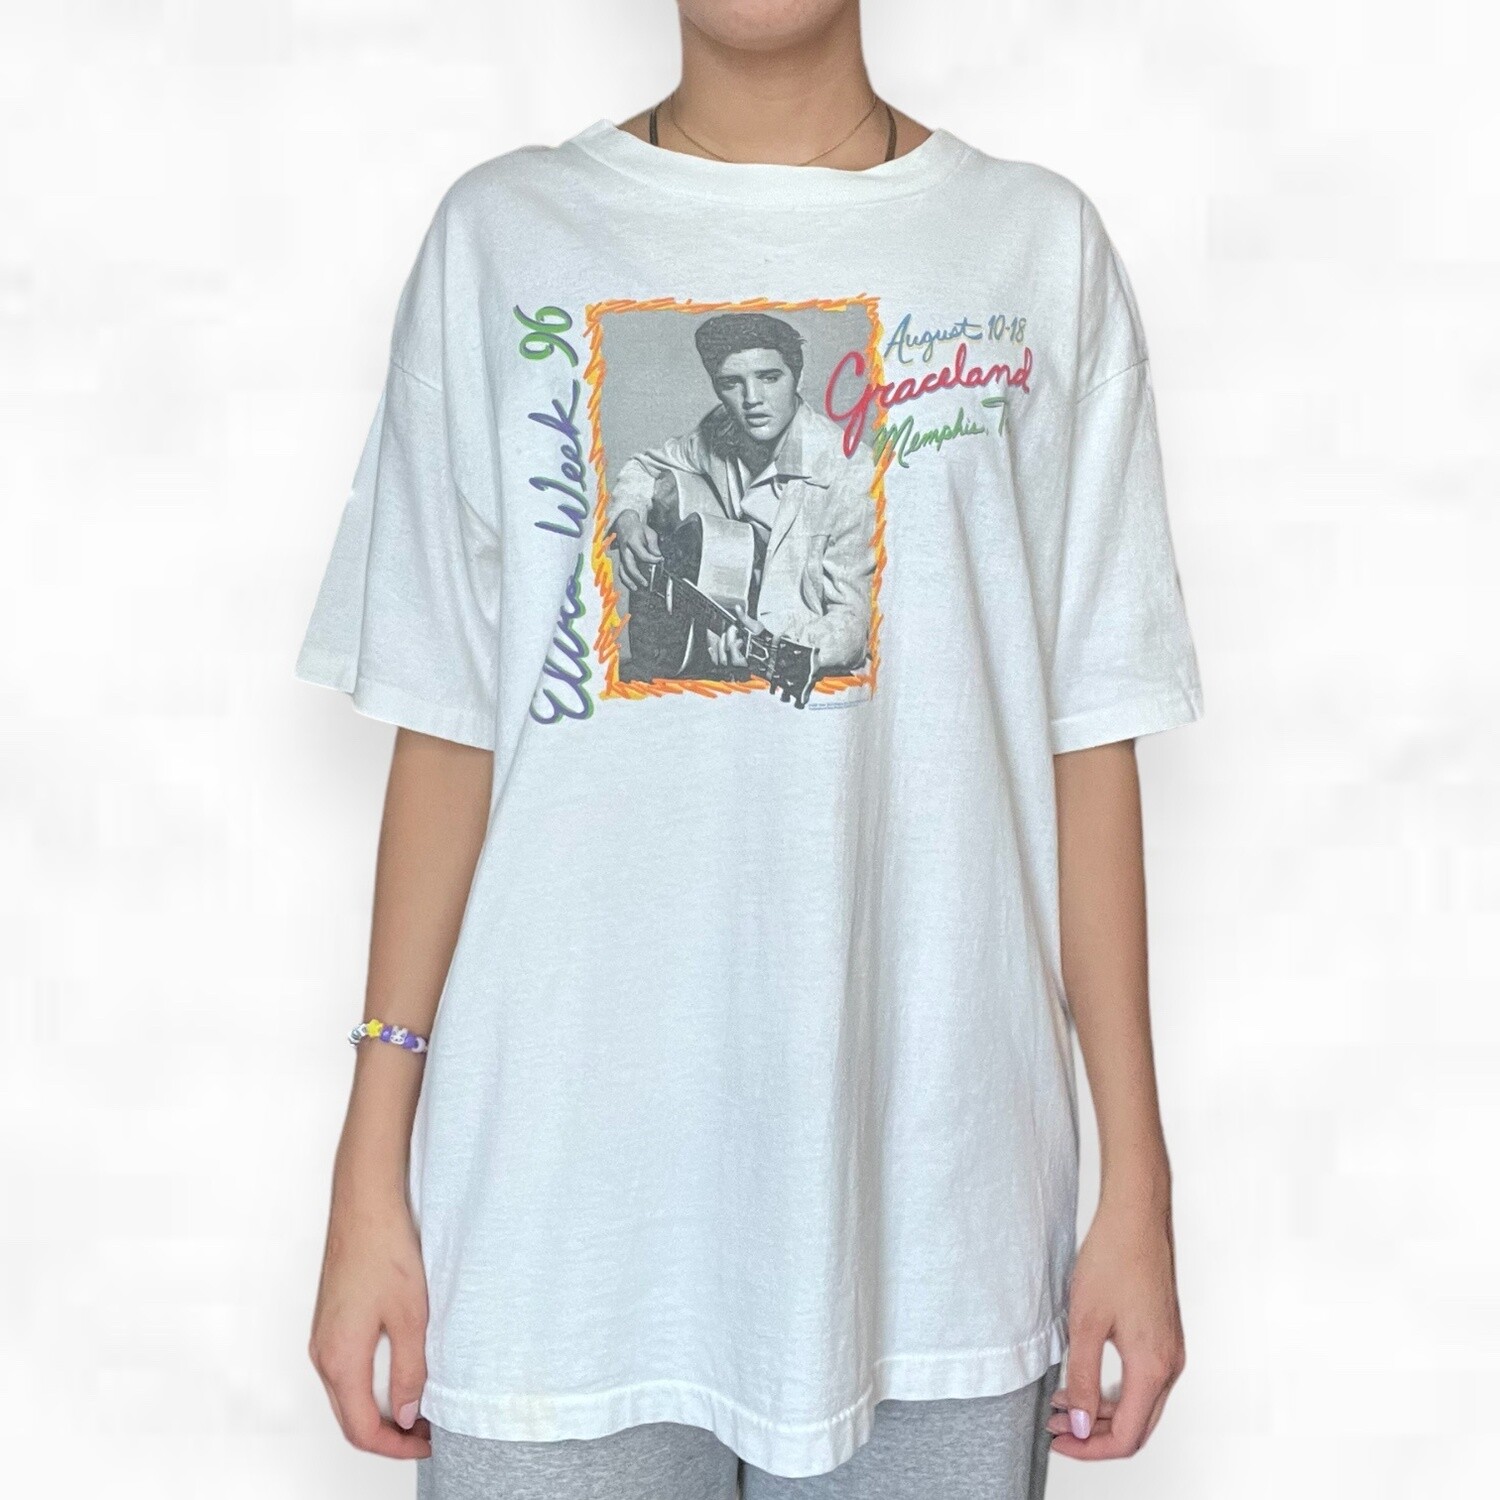 Vintage 1996 Elvis Week Tee, Size: XL, Color: White, Style: Band